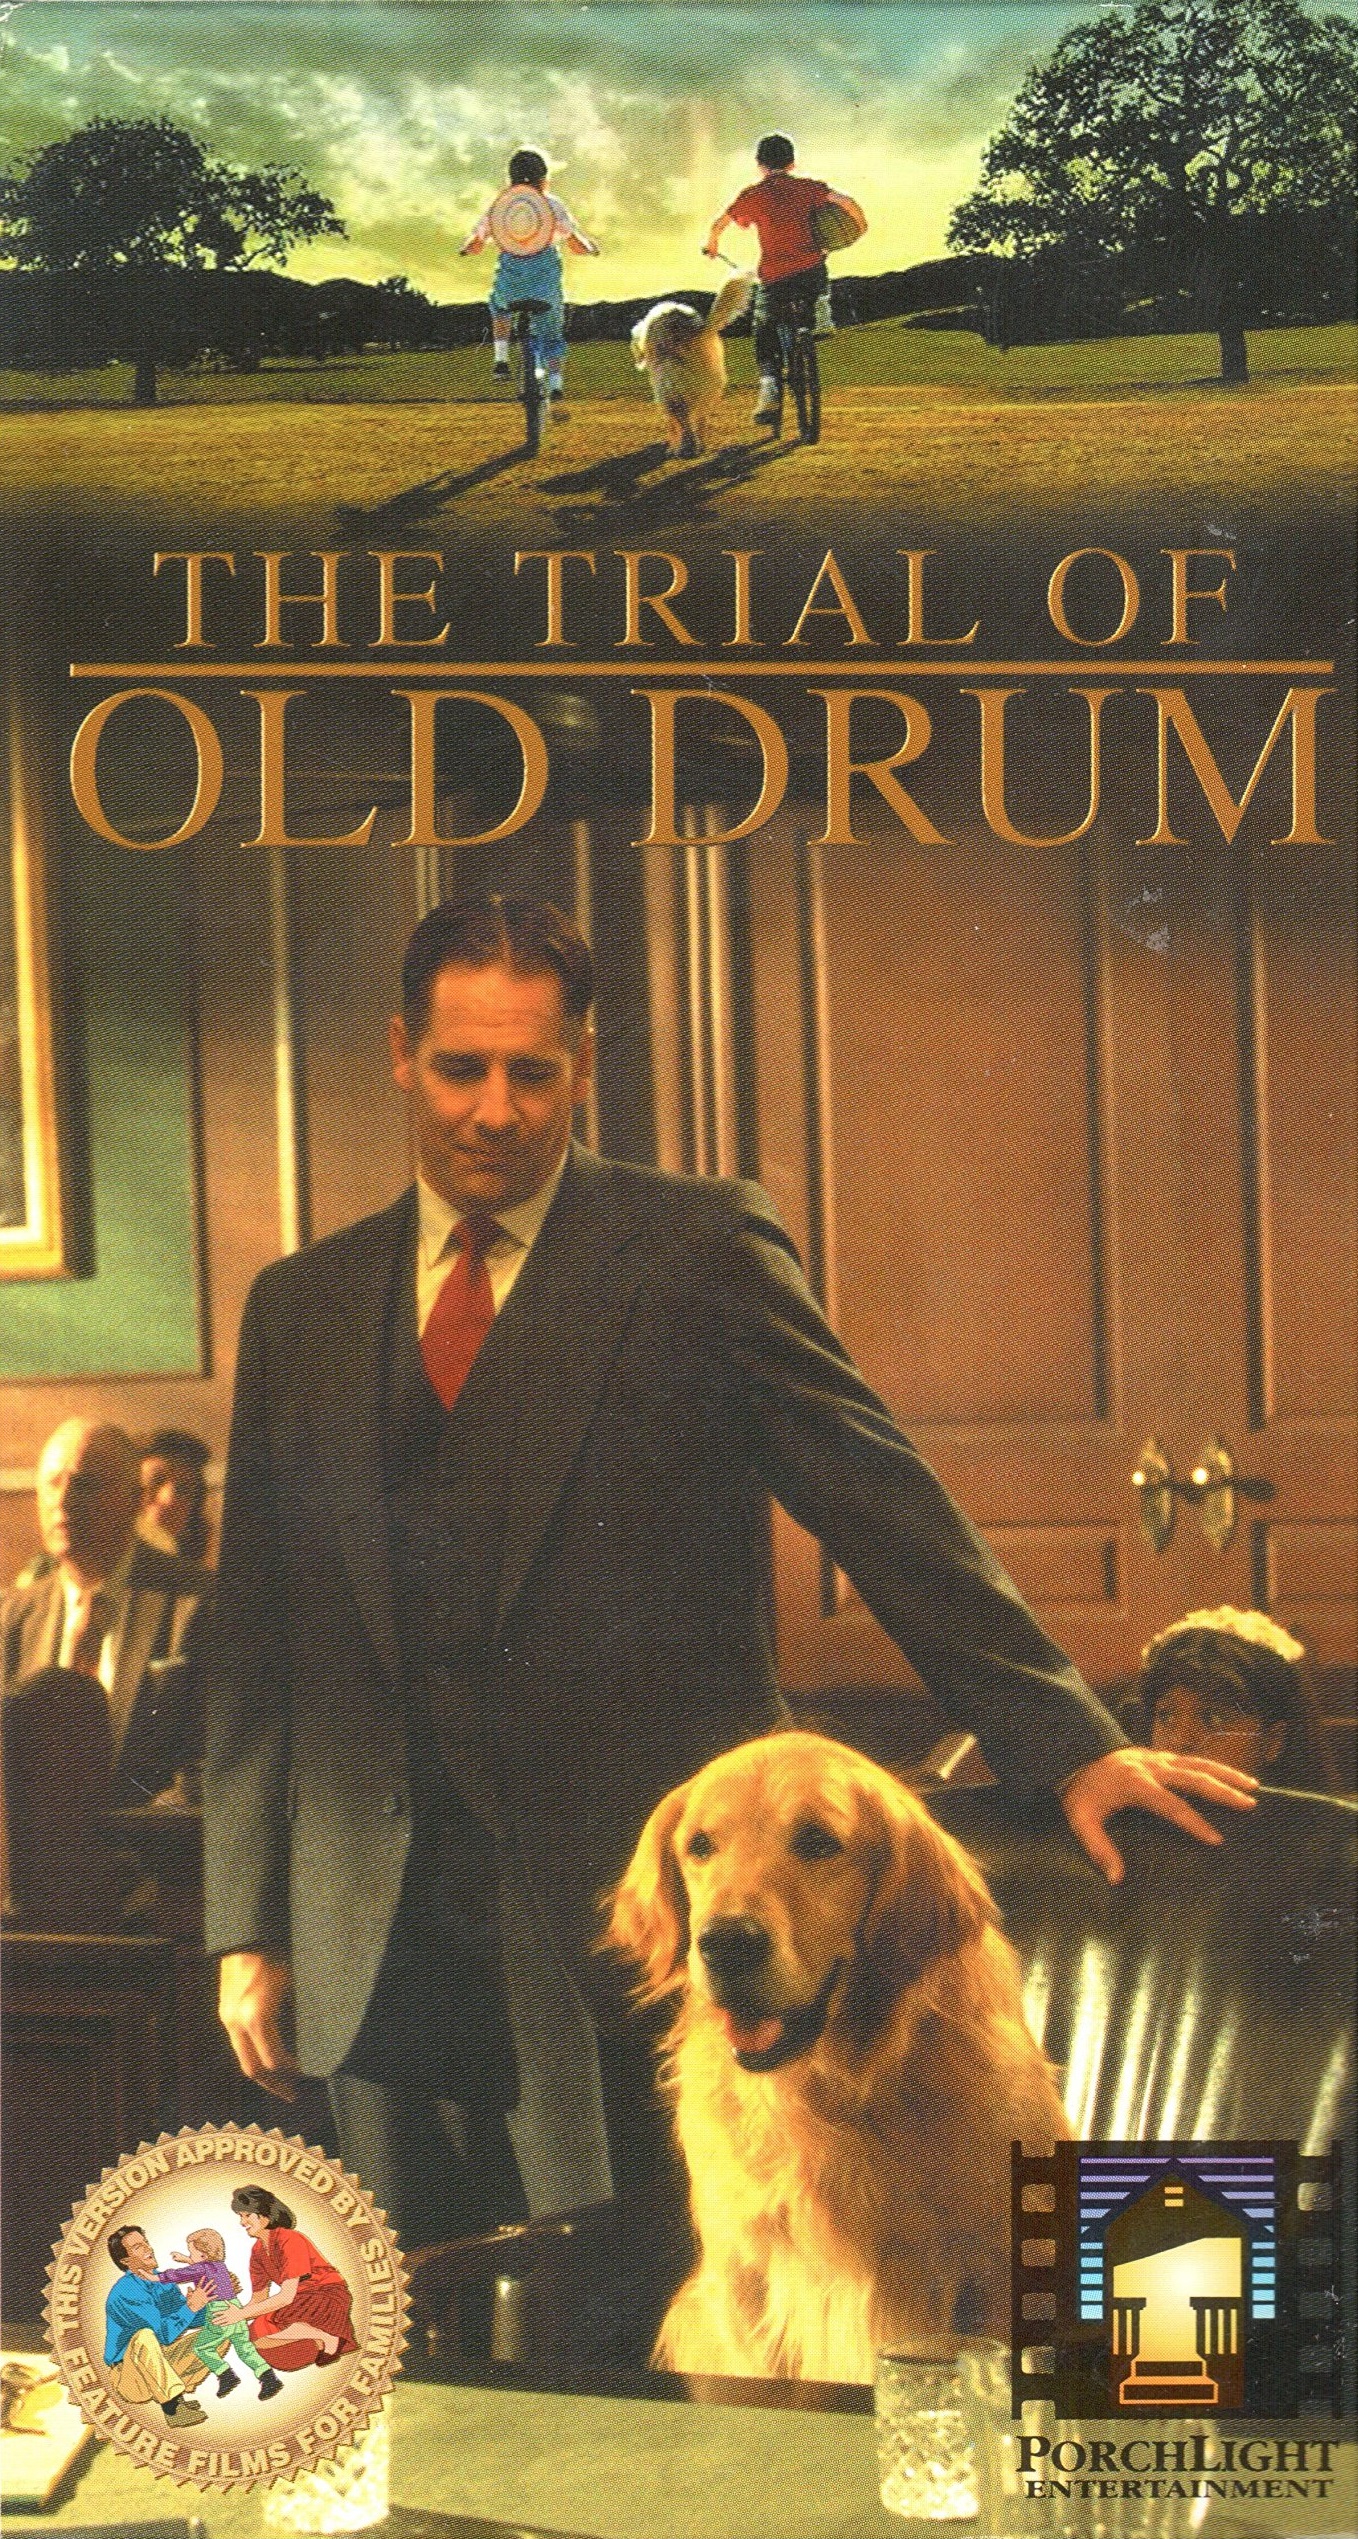 The Trial of Old Drum (2000) Screenshot 1